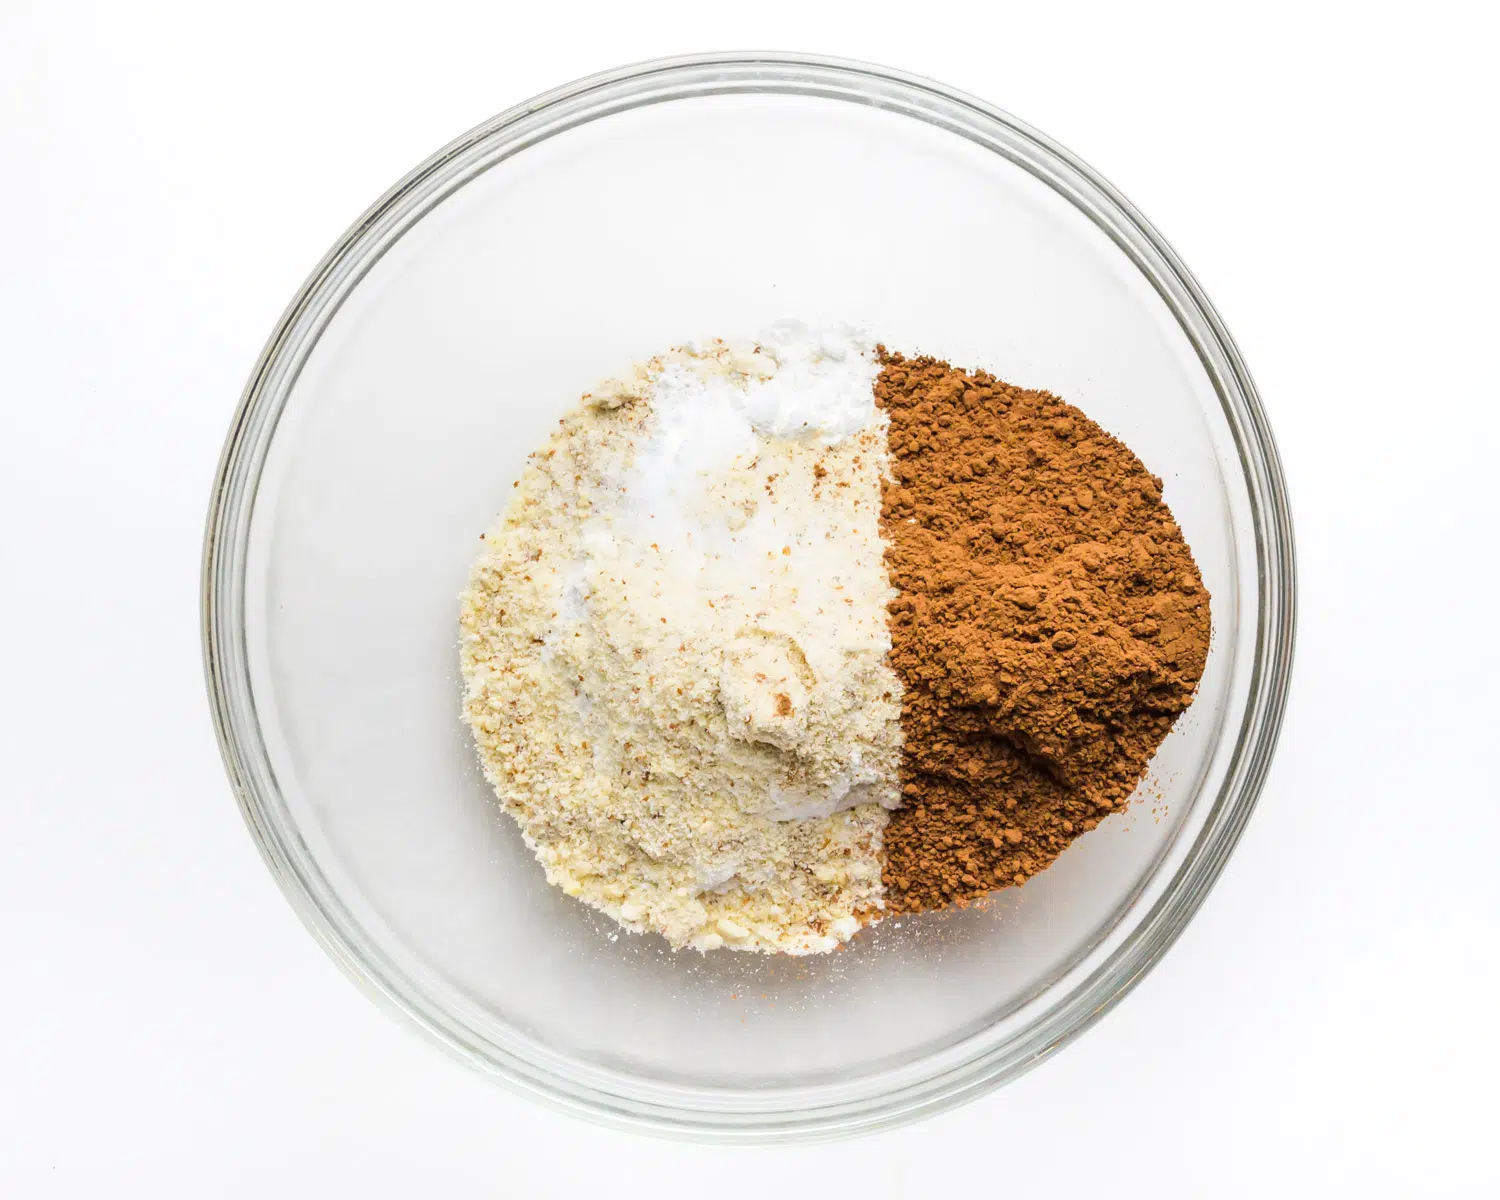 Dry ingredients are in a bowl, including cocoa powder, gluten-free flour, and more.